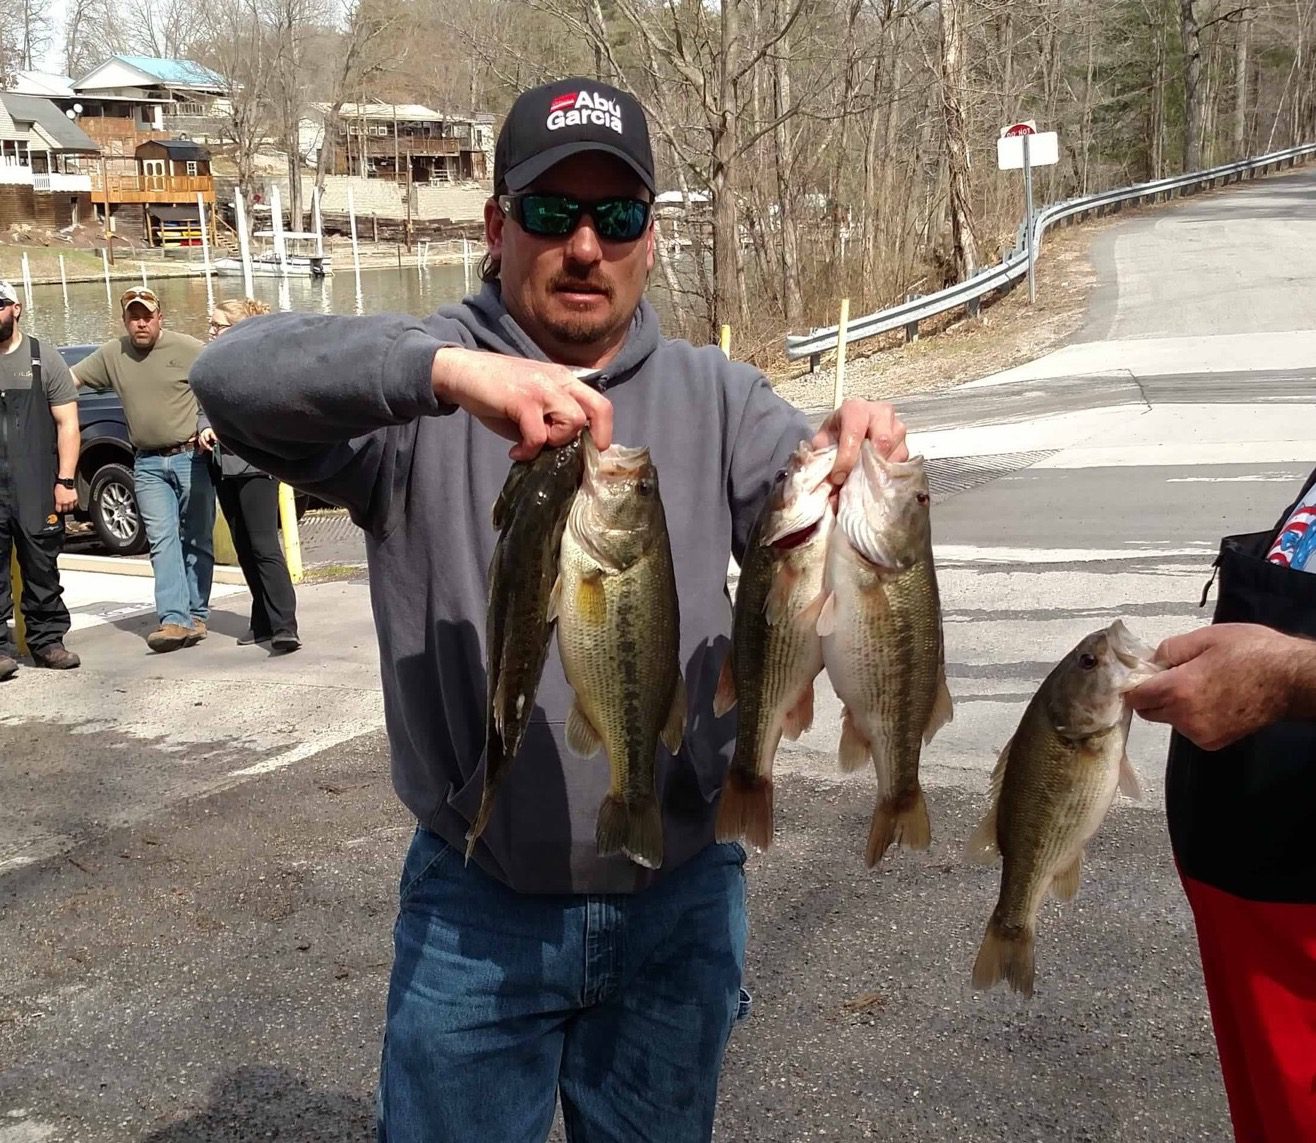 David Martin wins Stop #1 USA BASSIN King of Claytor Trail March 24,2019